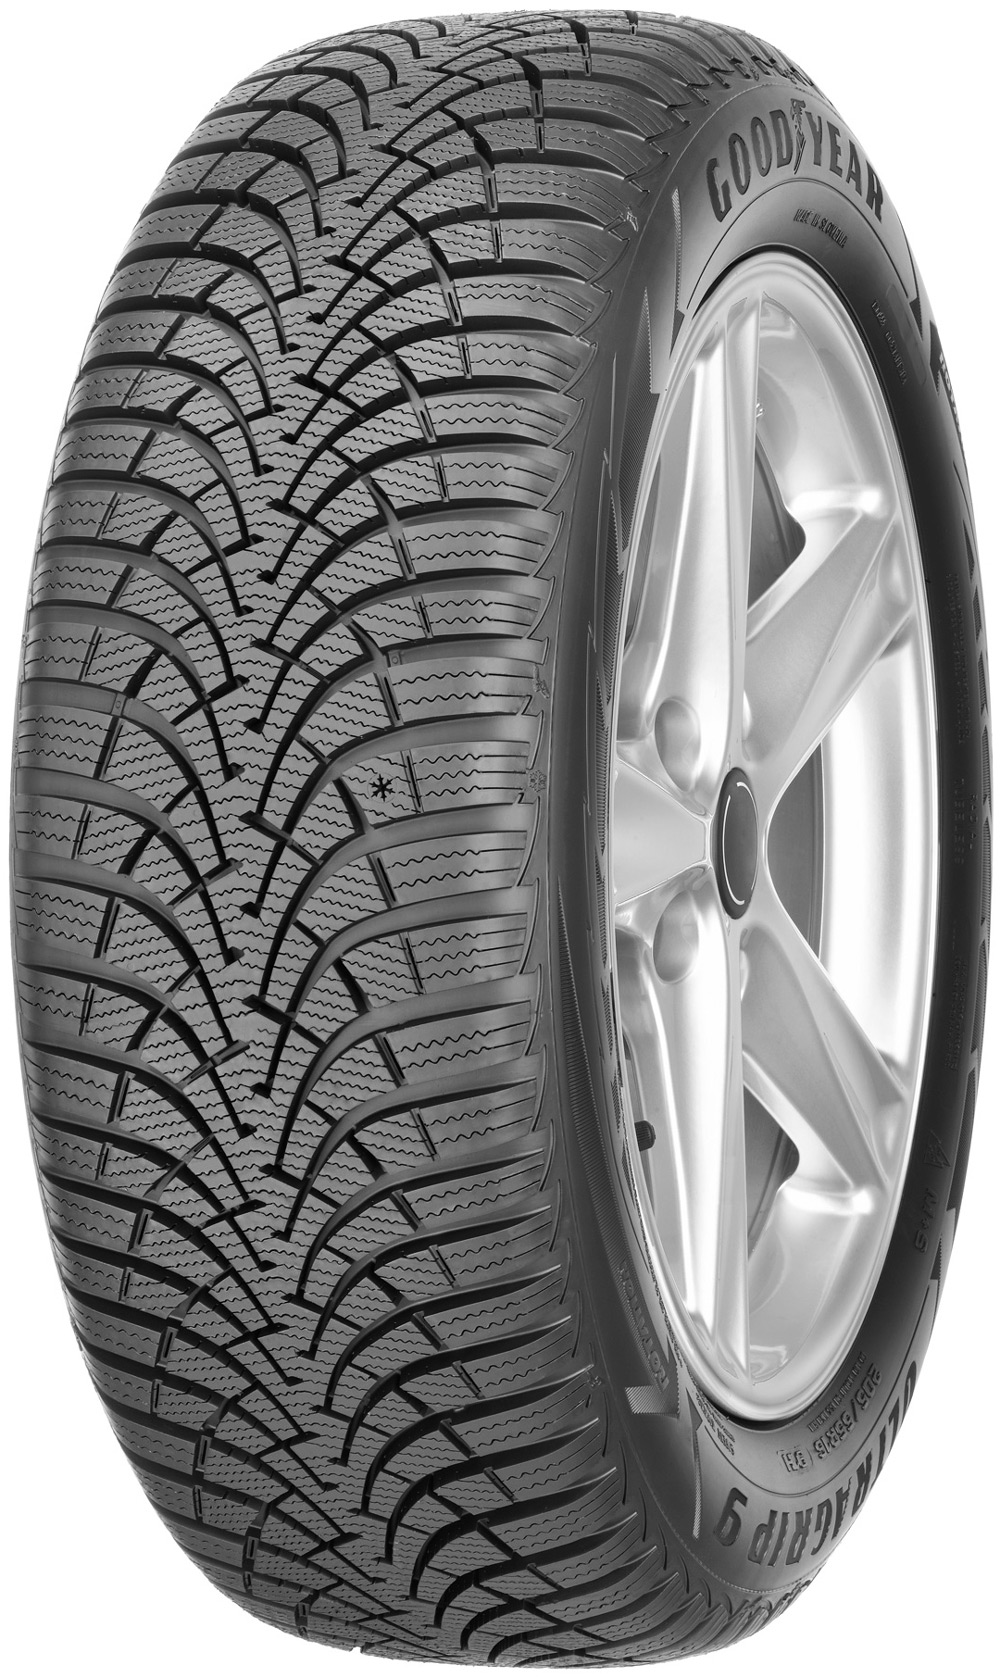 Anvelope auto GOODYEAR Ultra Grip 9 MS 205/65 R15 94H